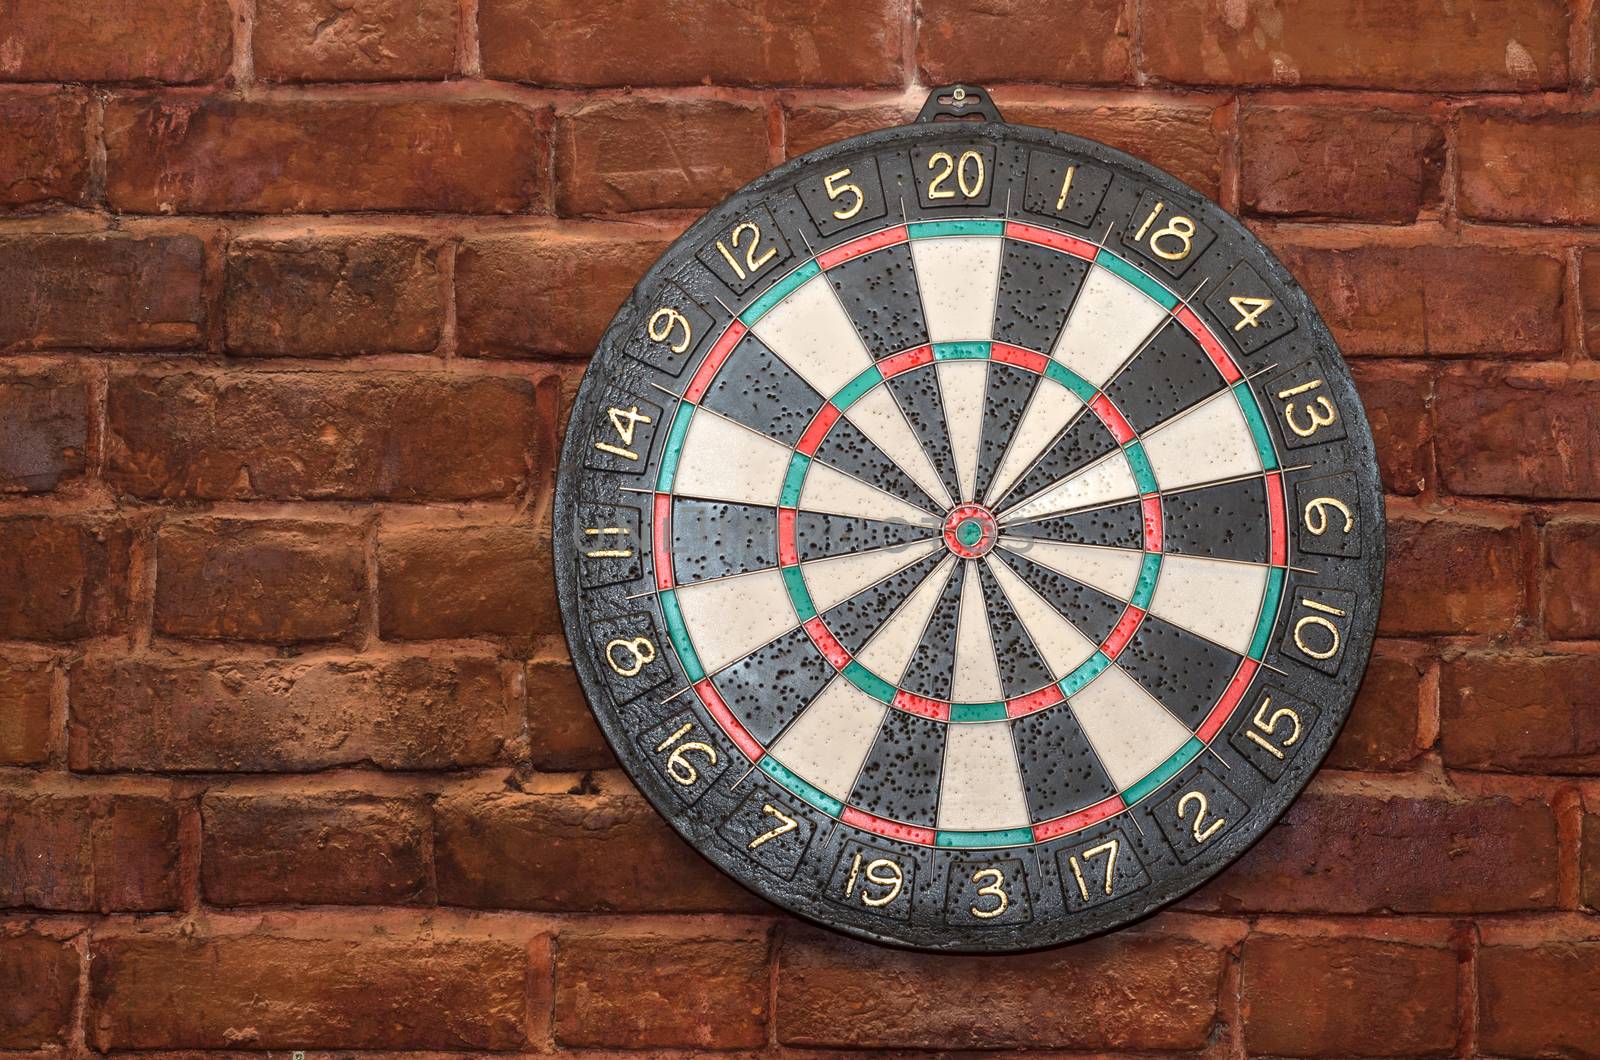 The game of Darts, against an old brick wall by Gaina